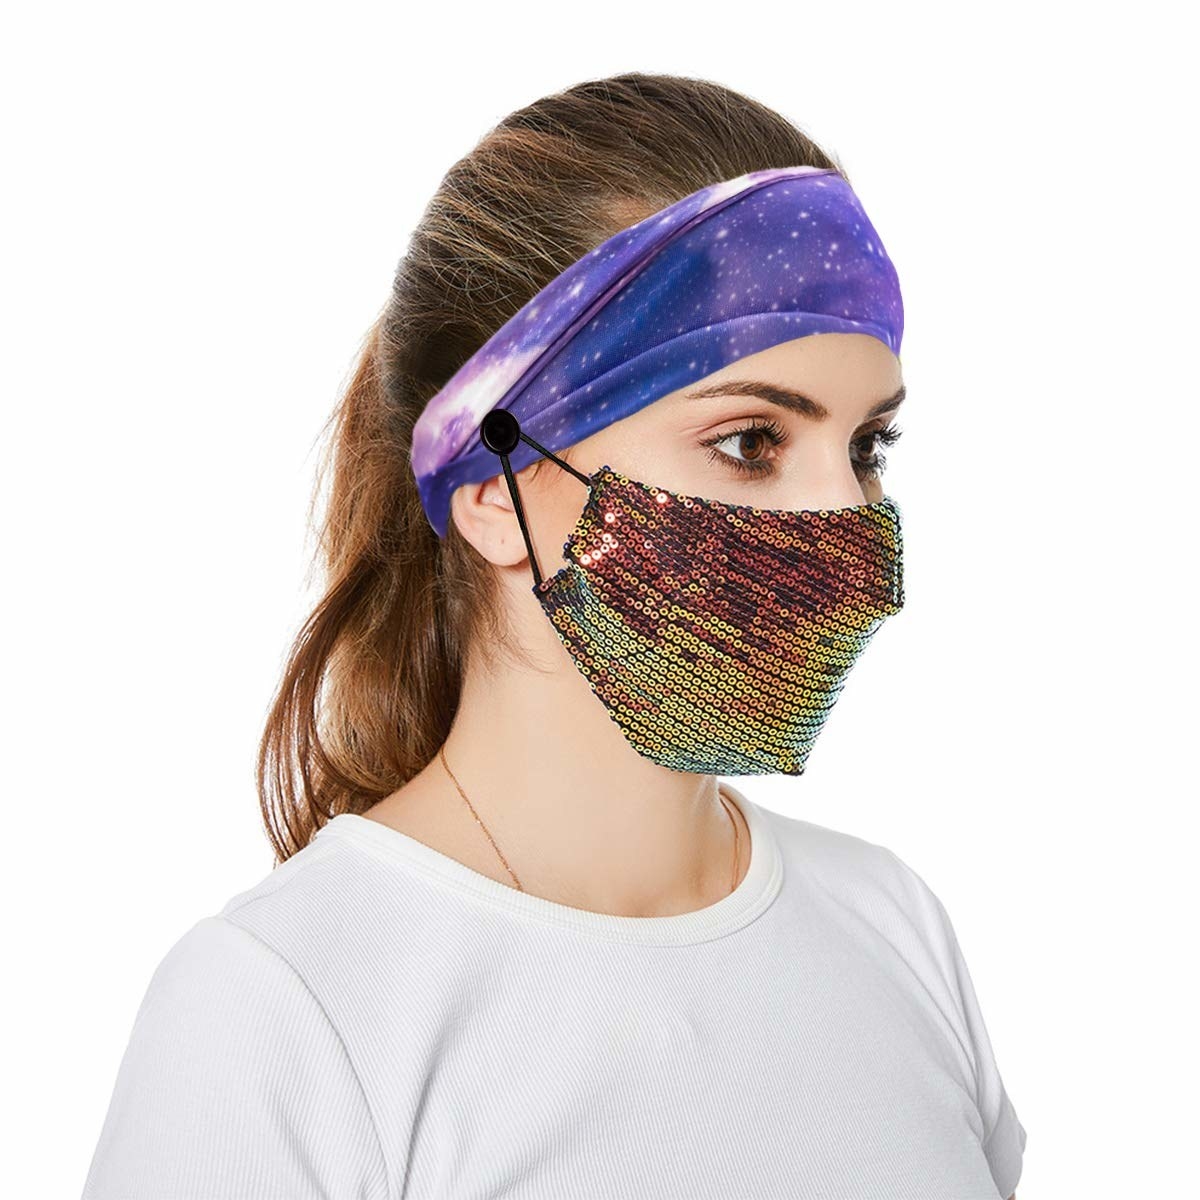 14 Mask Accessories To Make The "New Normal" So Much Easier